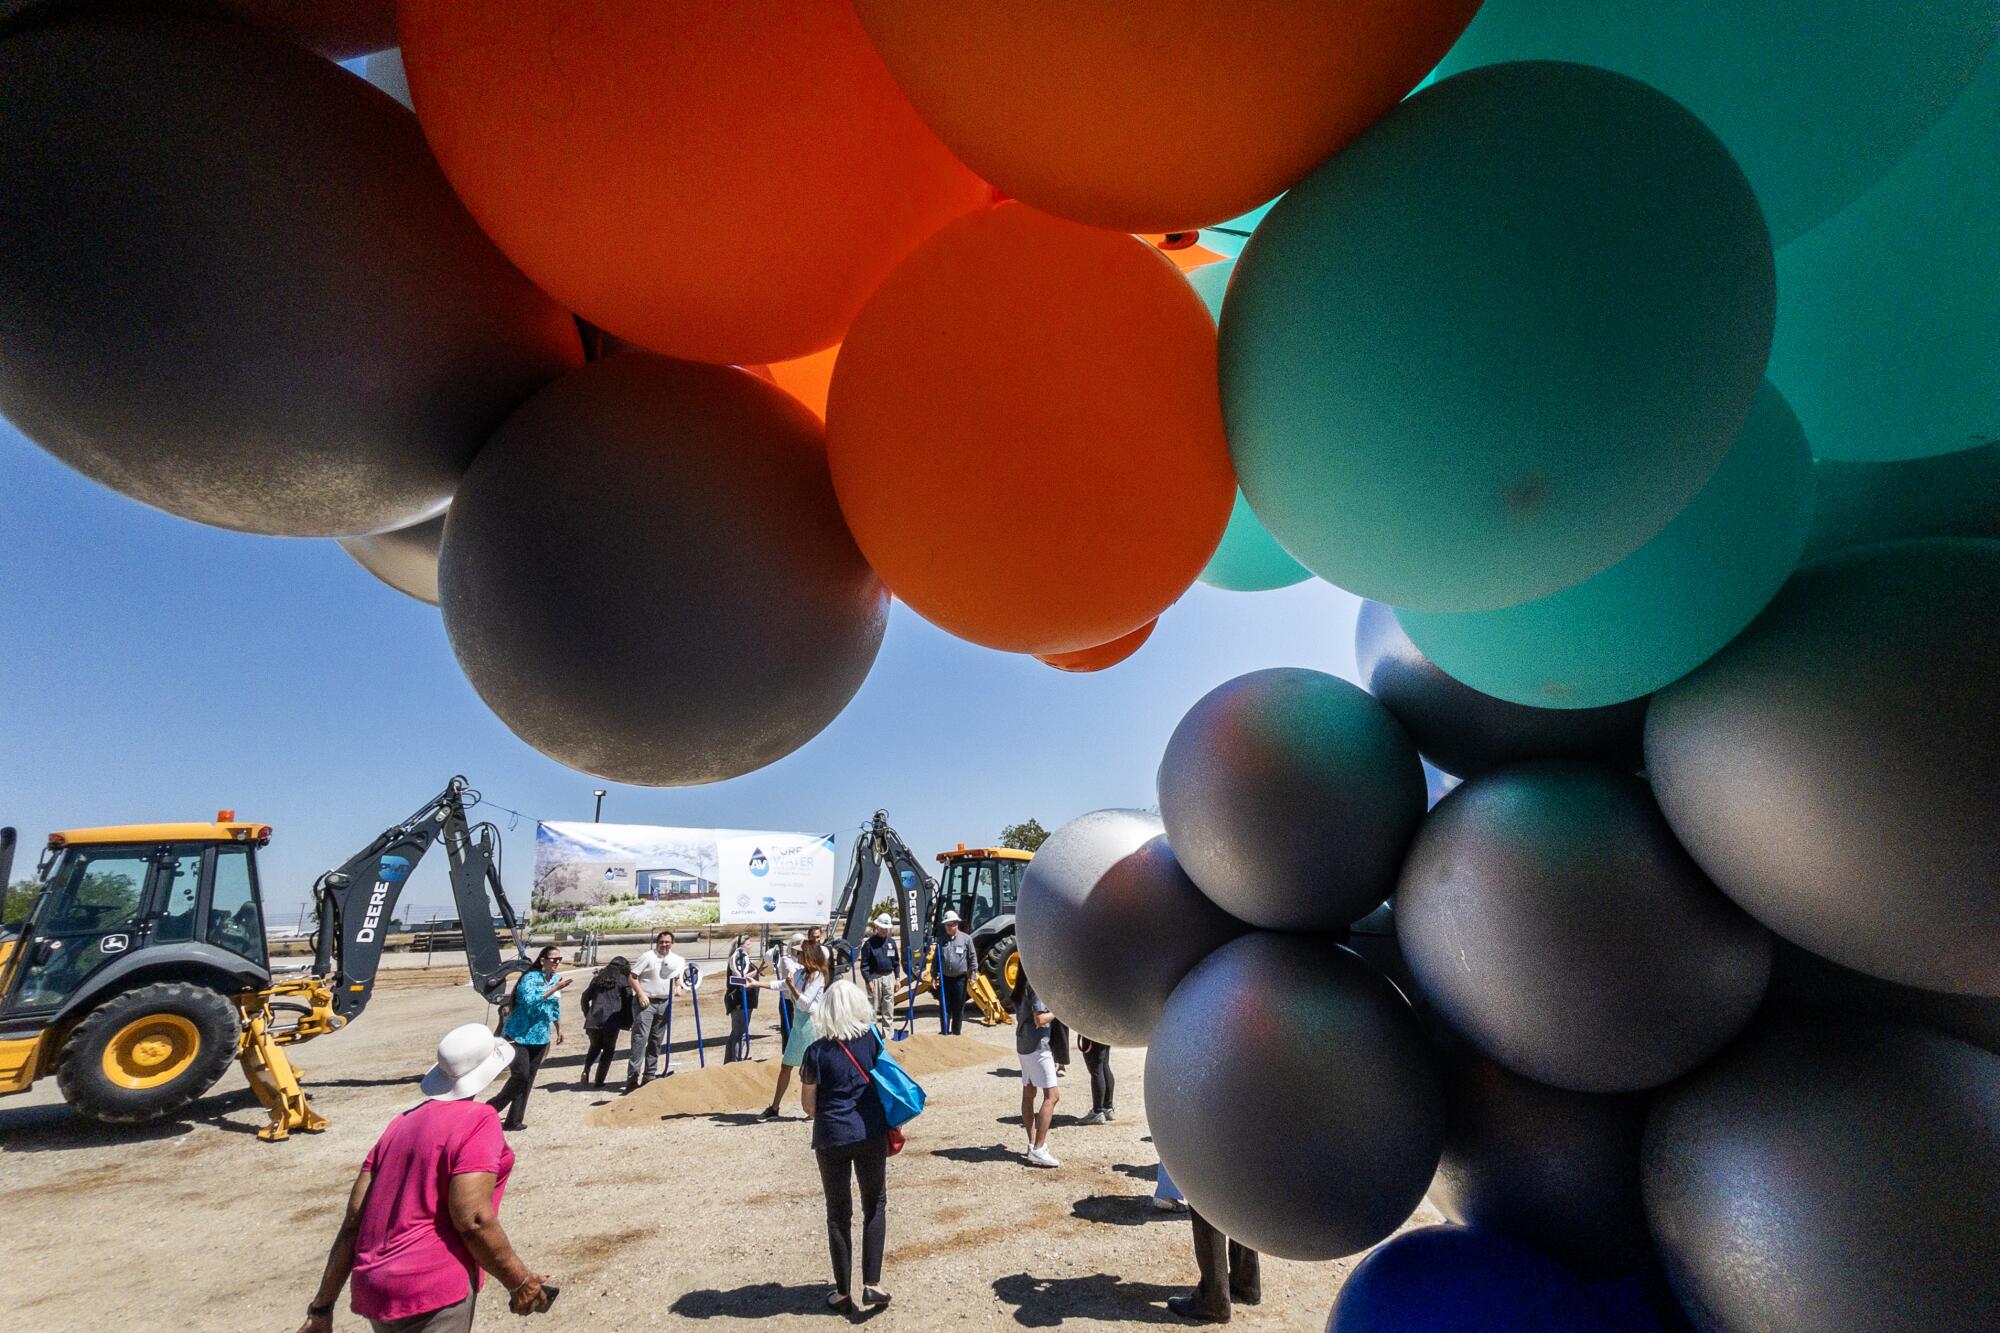 A photo of a cluster of balloons at a ground-breaking event.